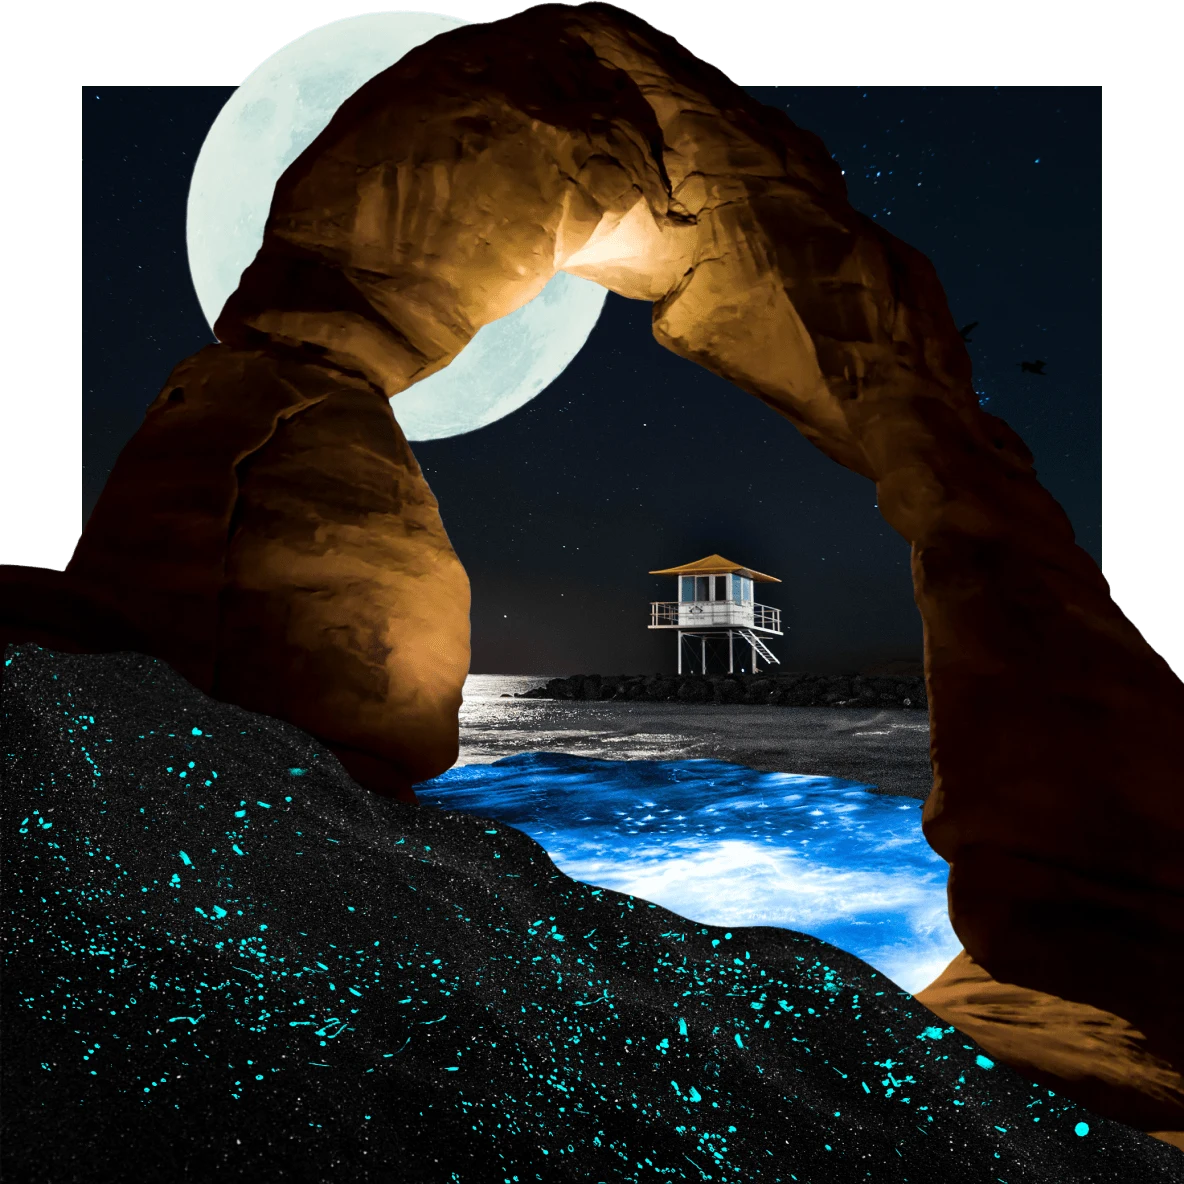 A glowing pool of water is under a red stone archway. A large, full moon is the background, shining on a beach hut with stairs, on top of dark, ocean rocks. Blue neon specks against dark waves in the foreground.